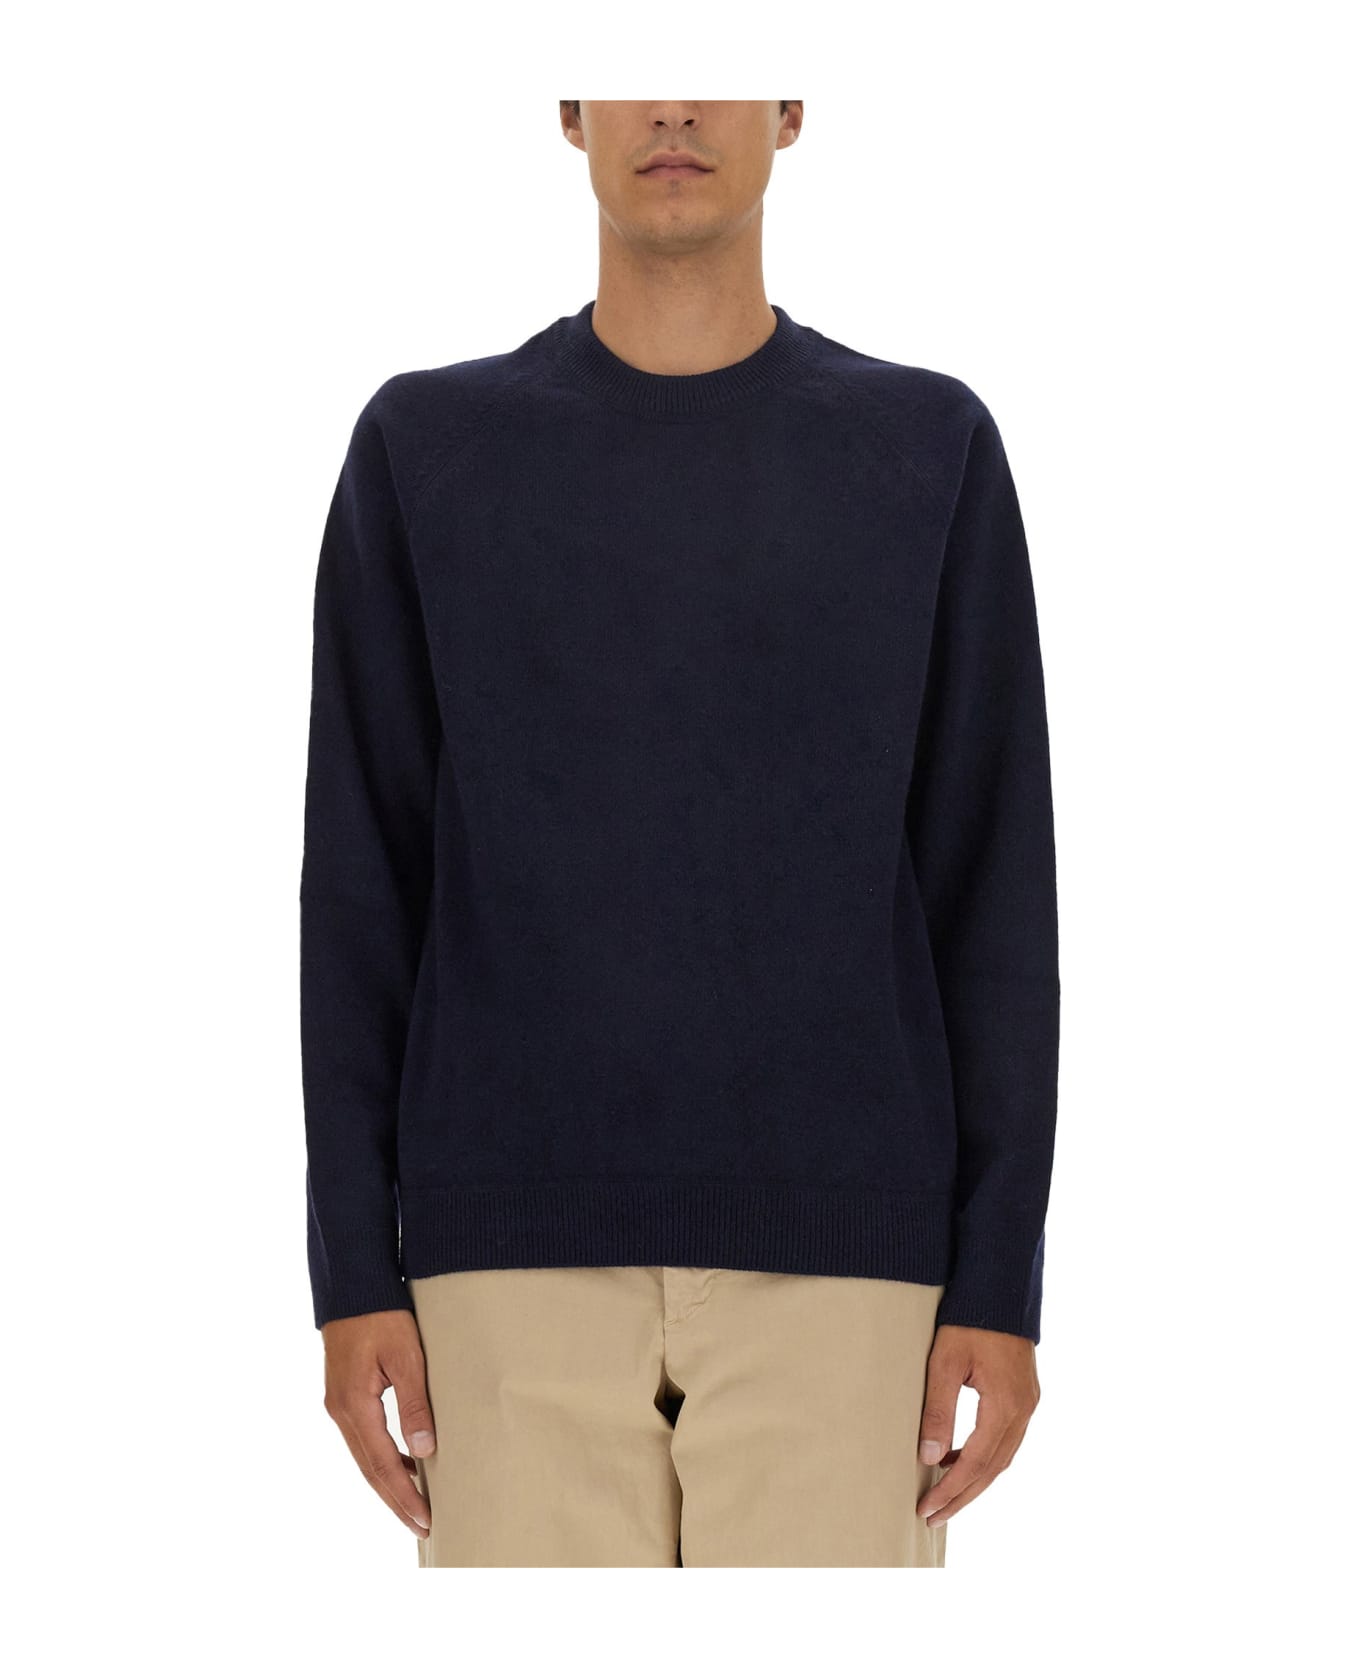 PS by Paul Smith Wool Jersey. - BLUE ニットウェア